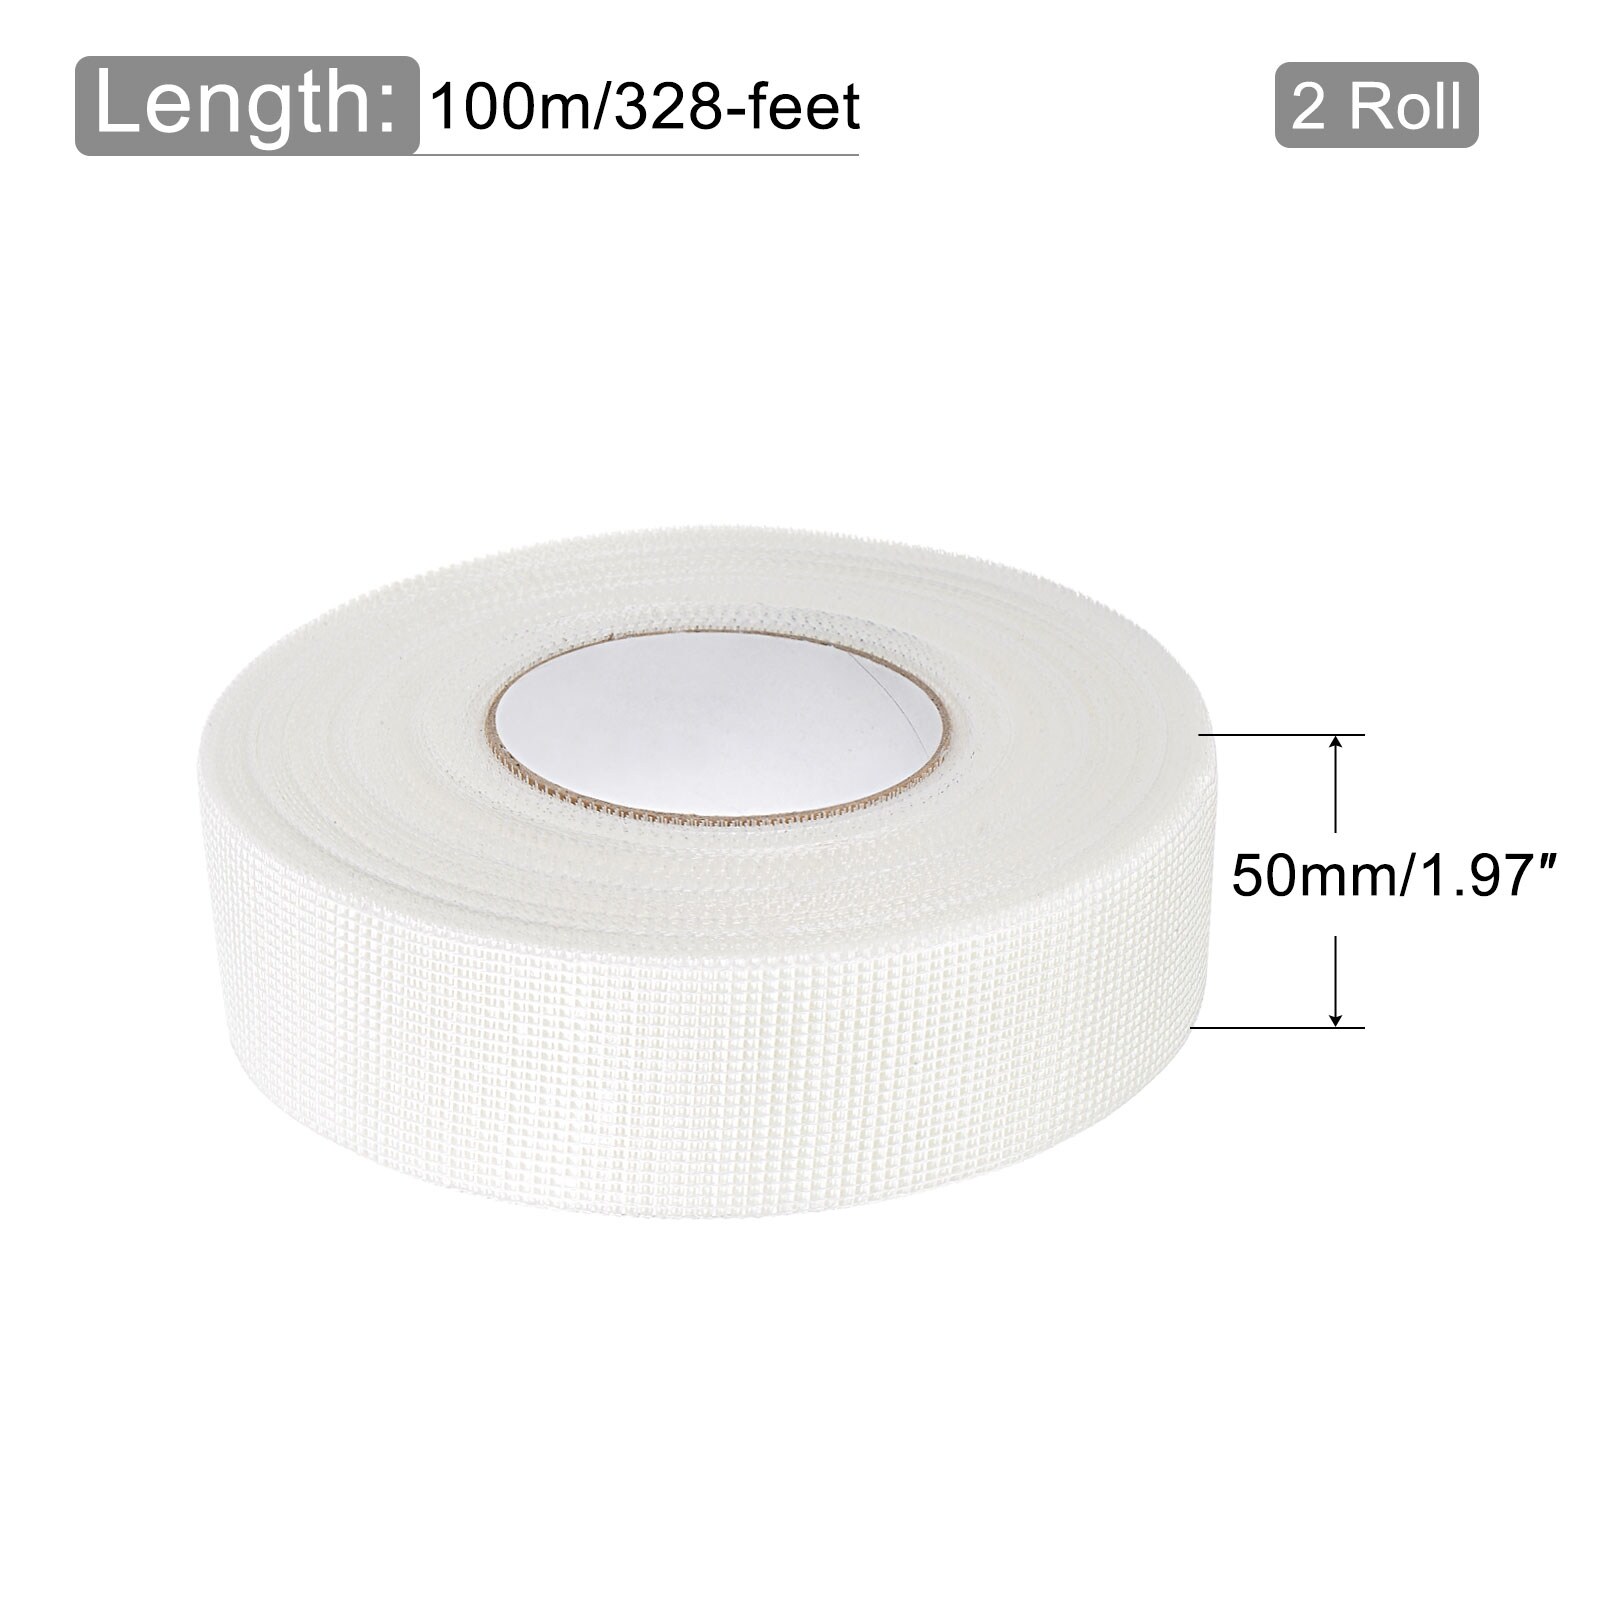 Double Sided Tape-2000x20x1mm Strong Adhesive Mounting Tape for Wall, 2pcs Tape - Transparent - 2000mm x 20mm x 1mm